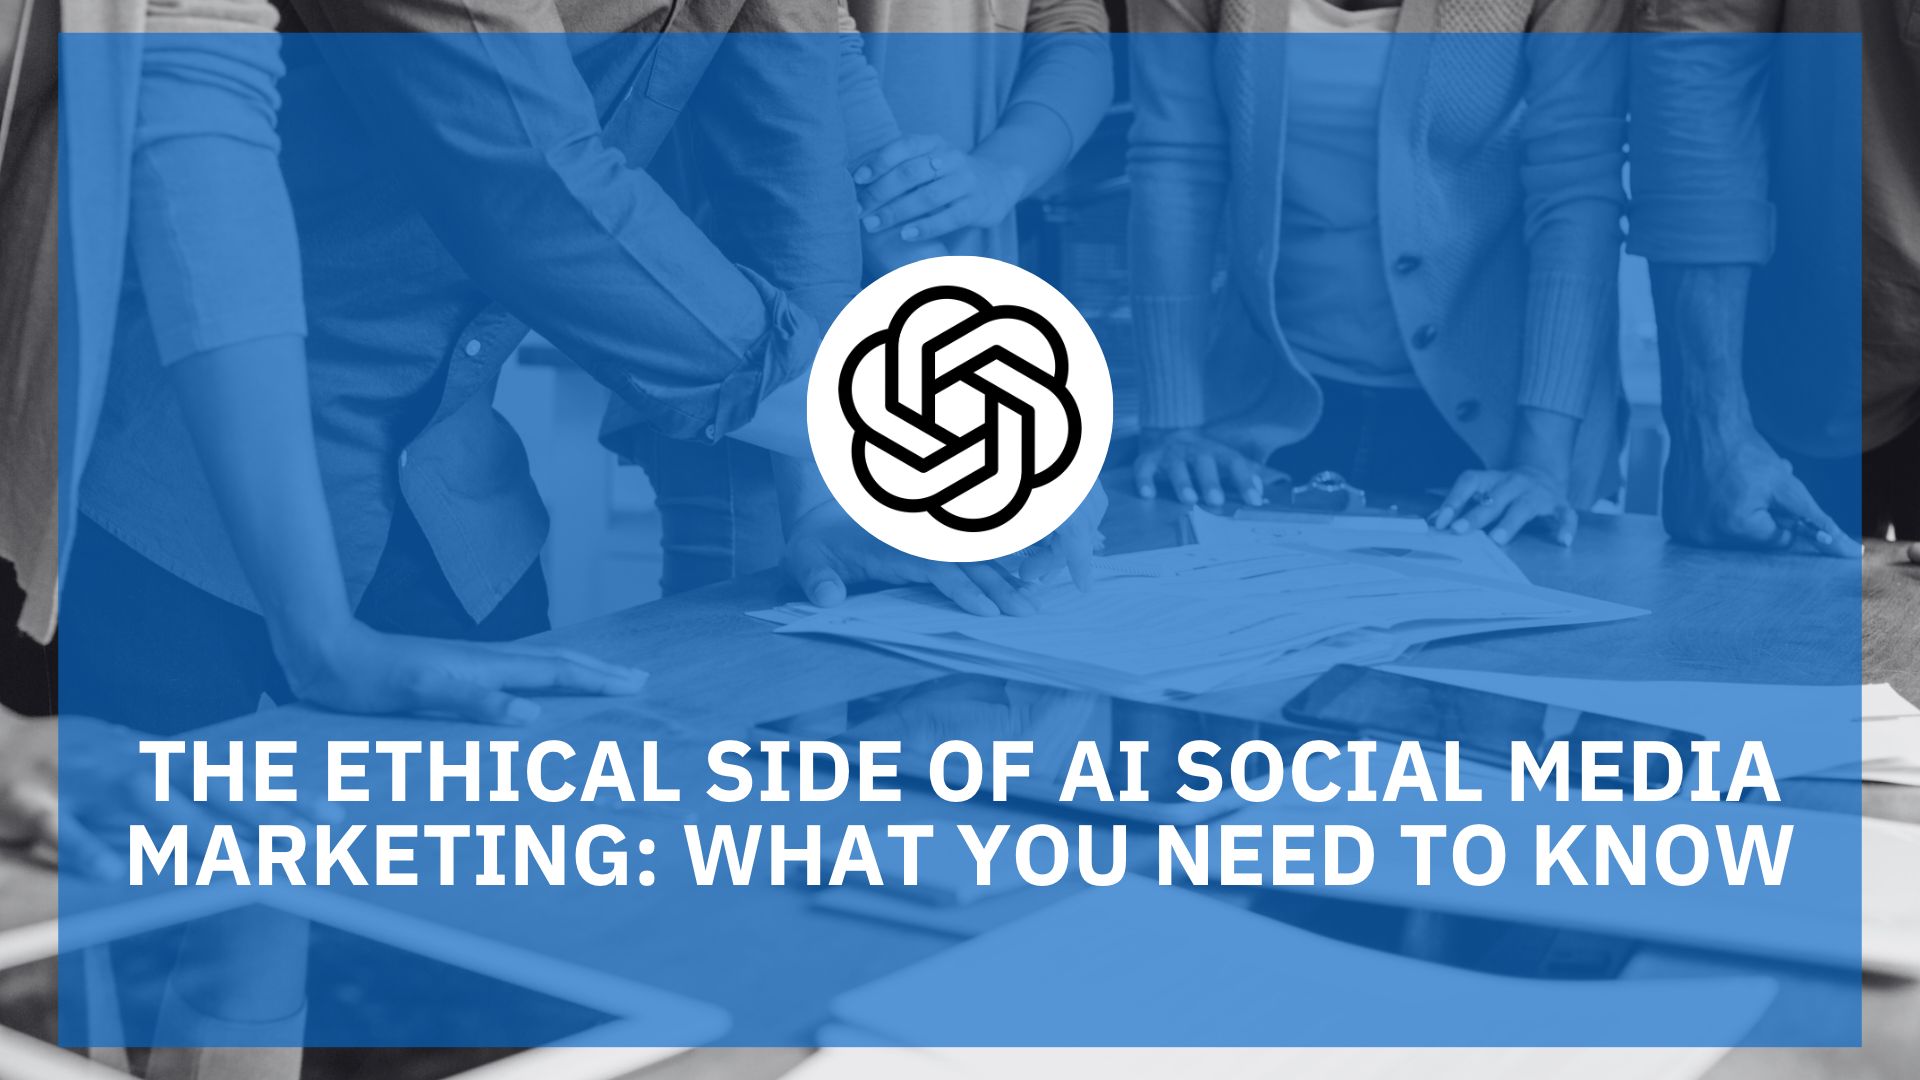 http://marketingelementsblog.com/2023/05/the-ethical-side-of-ai-social-media-marketing-what-you-need-to-know/